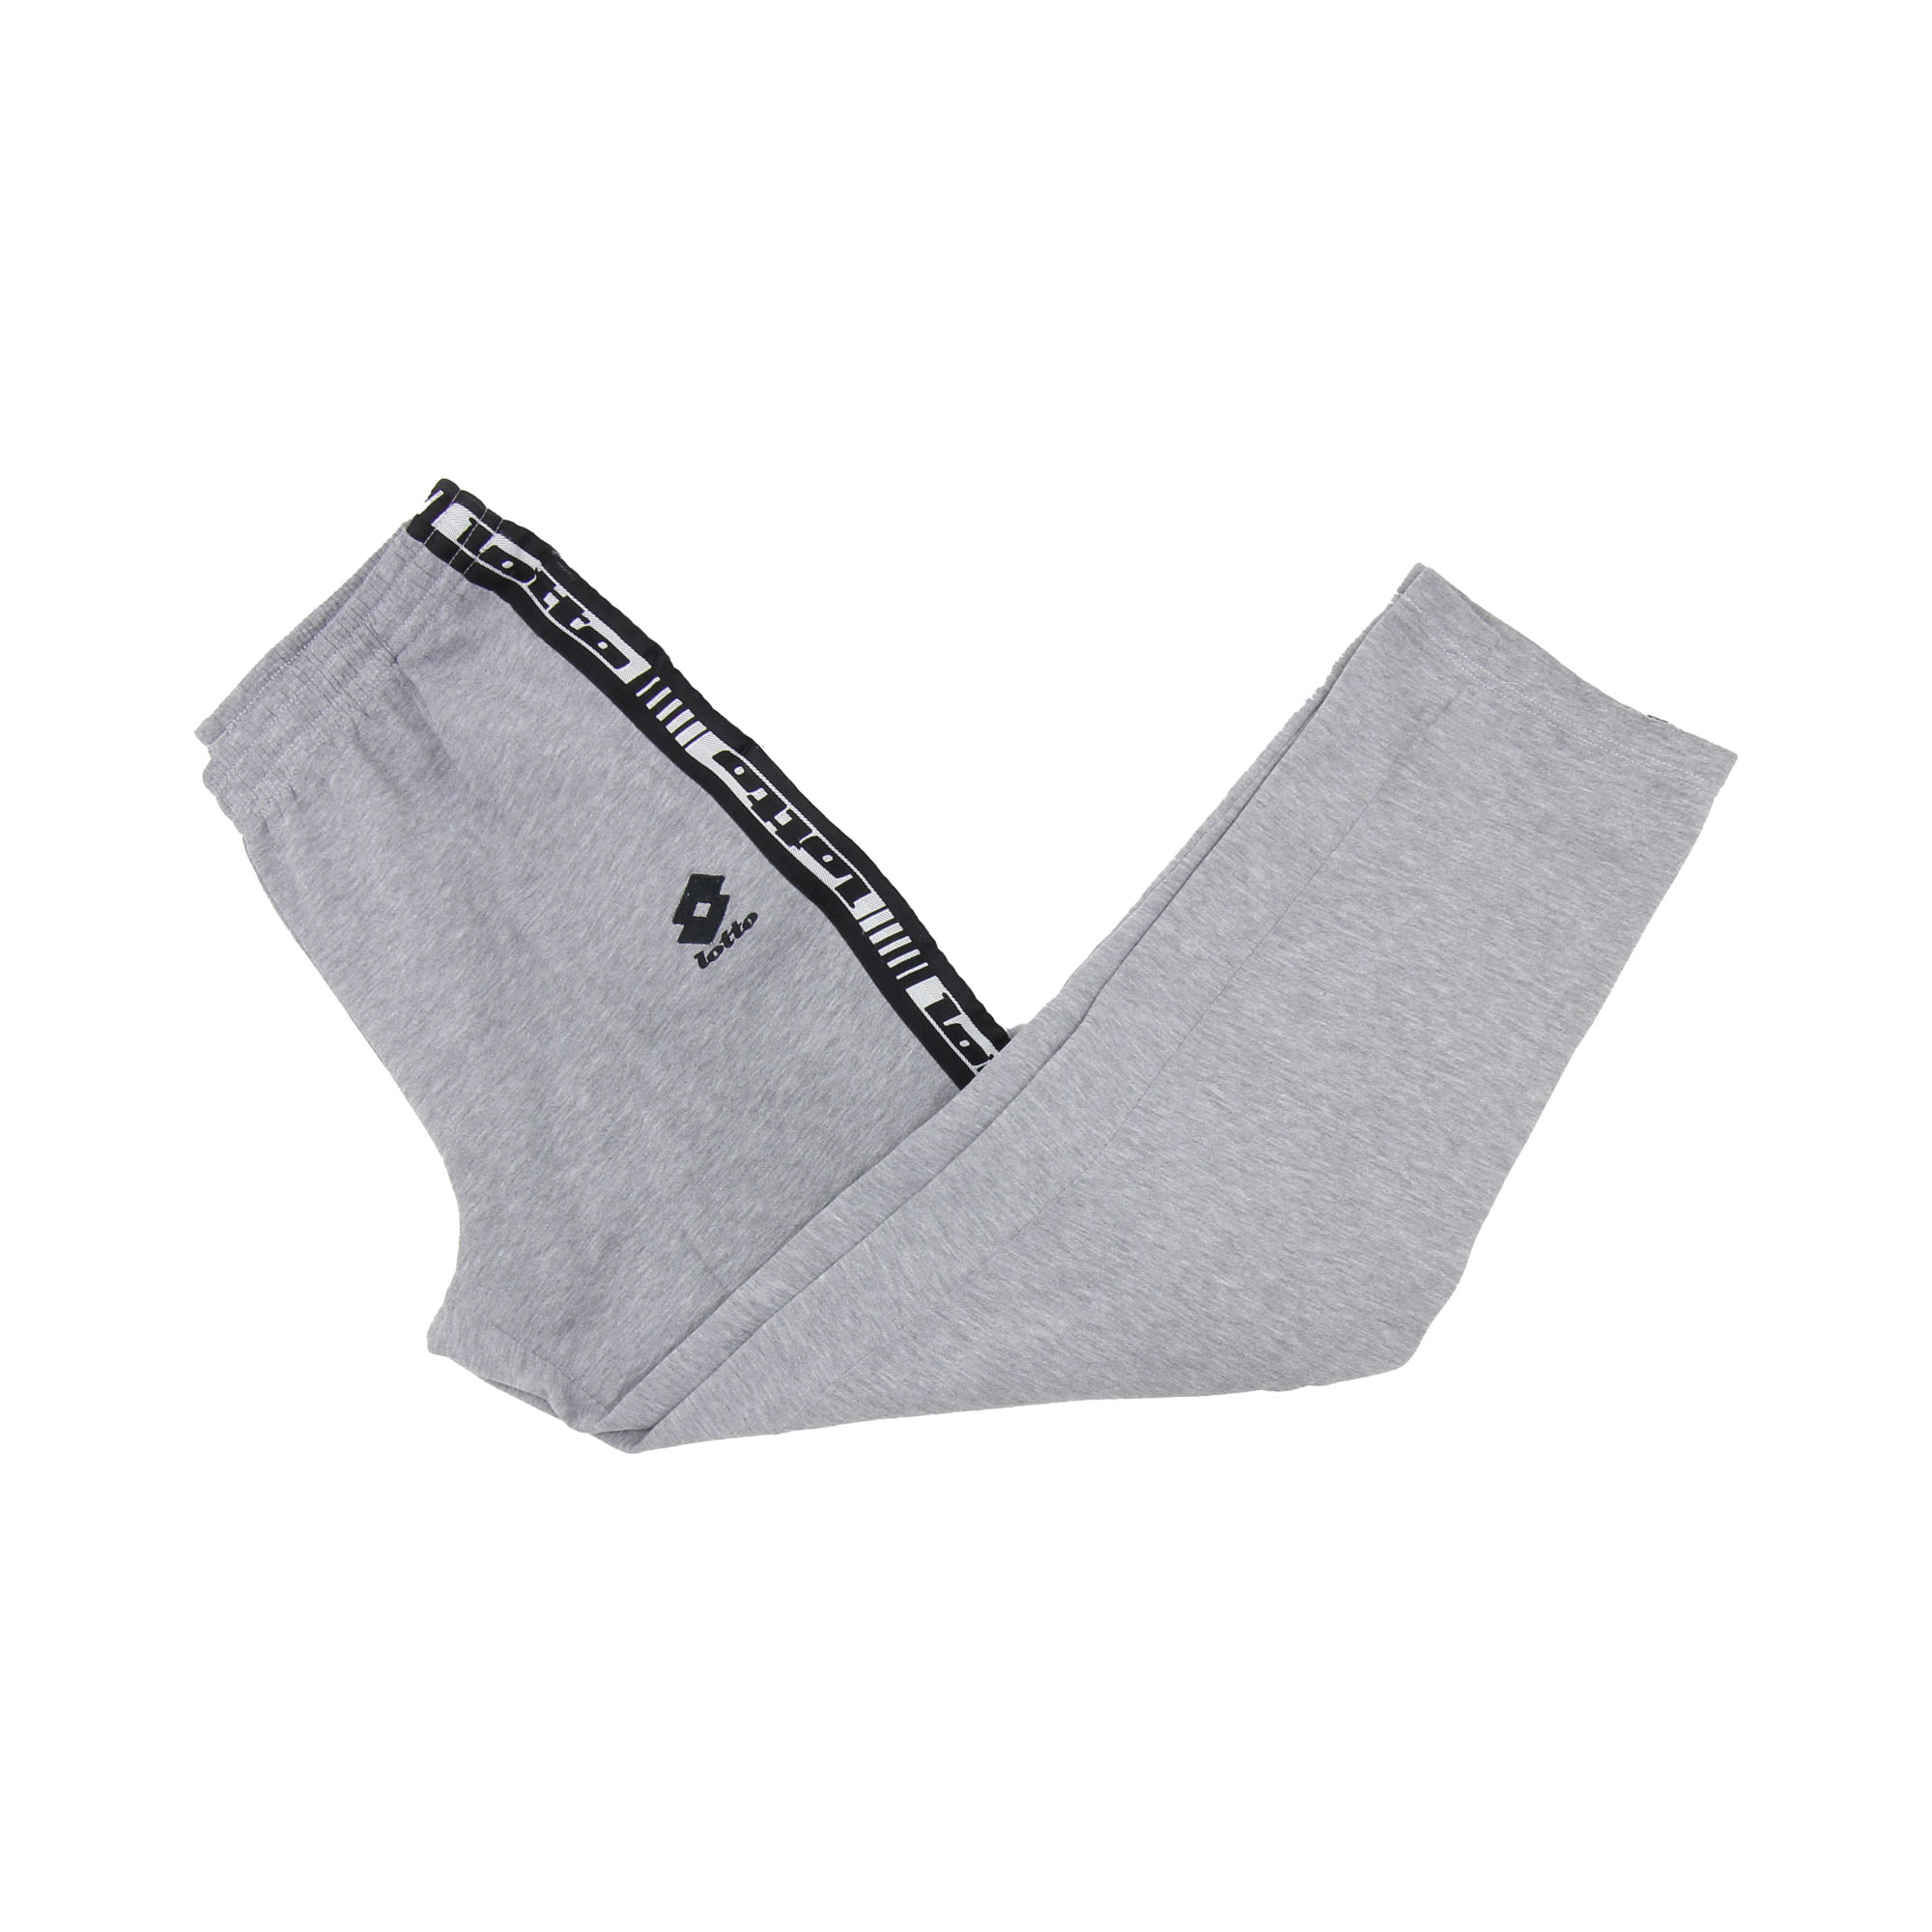 Lotto Embroidered Logo Sweatpants -  XL